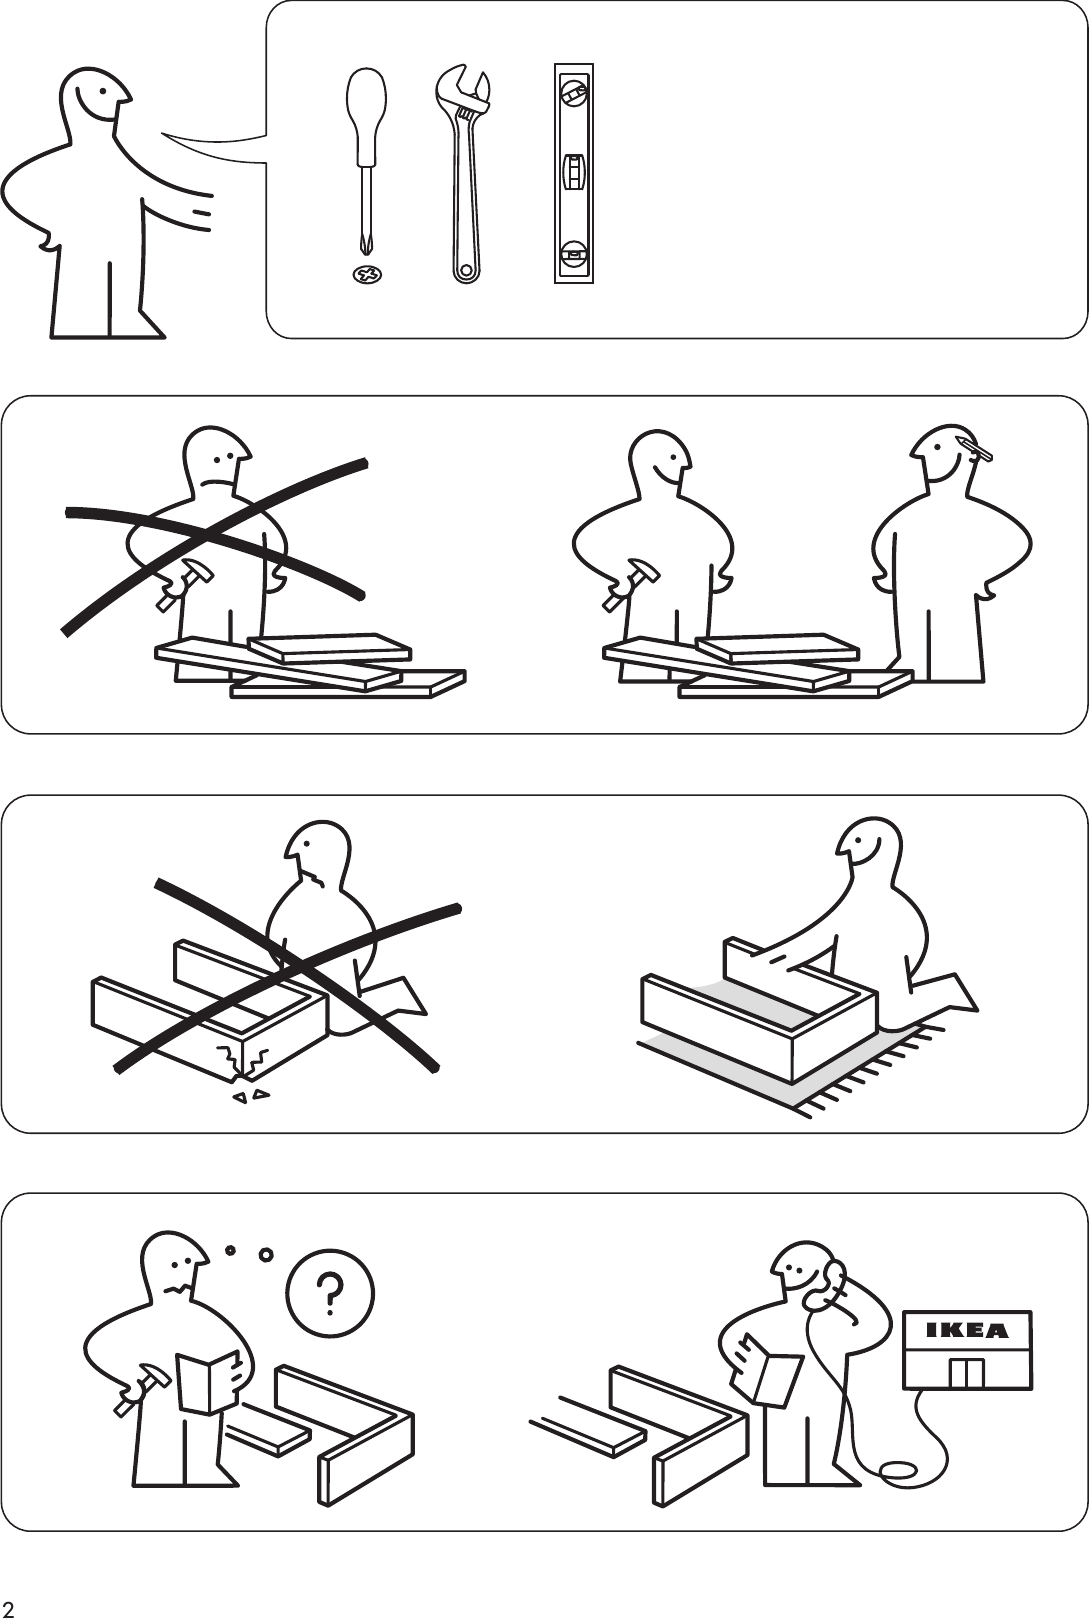 Page 2 of 12 - Ikea Ikea-Broder-T-Foot-Brace-23-Assembly-Instruction